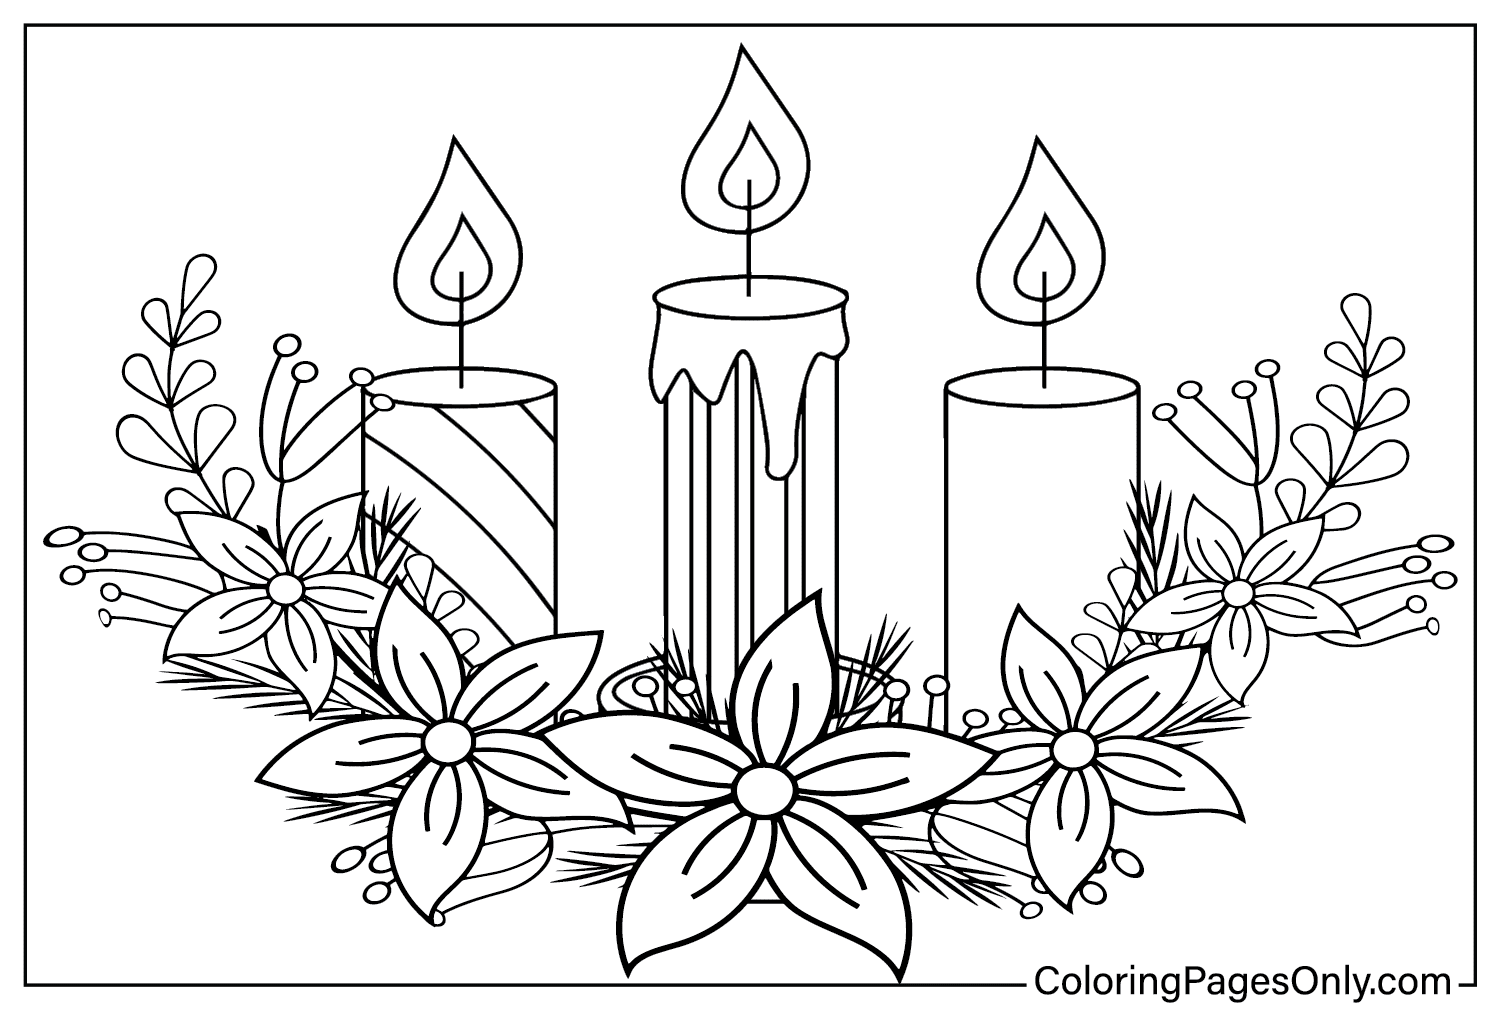 Advent Wreath Free Coloring Page from Advent Wreath